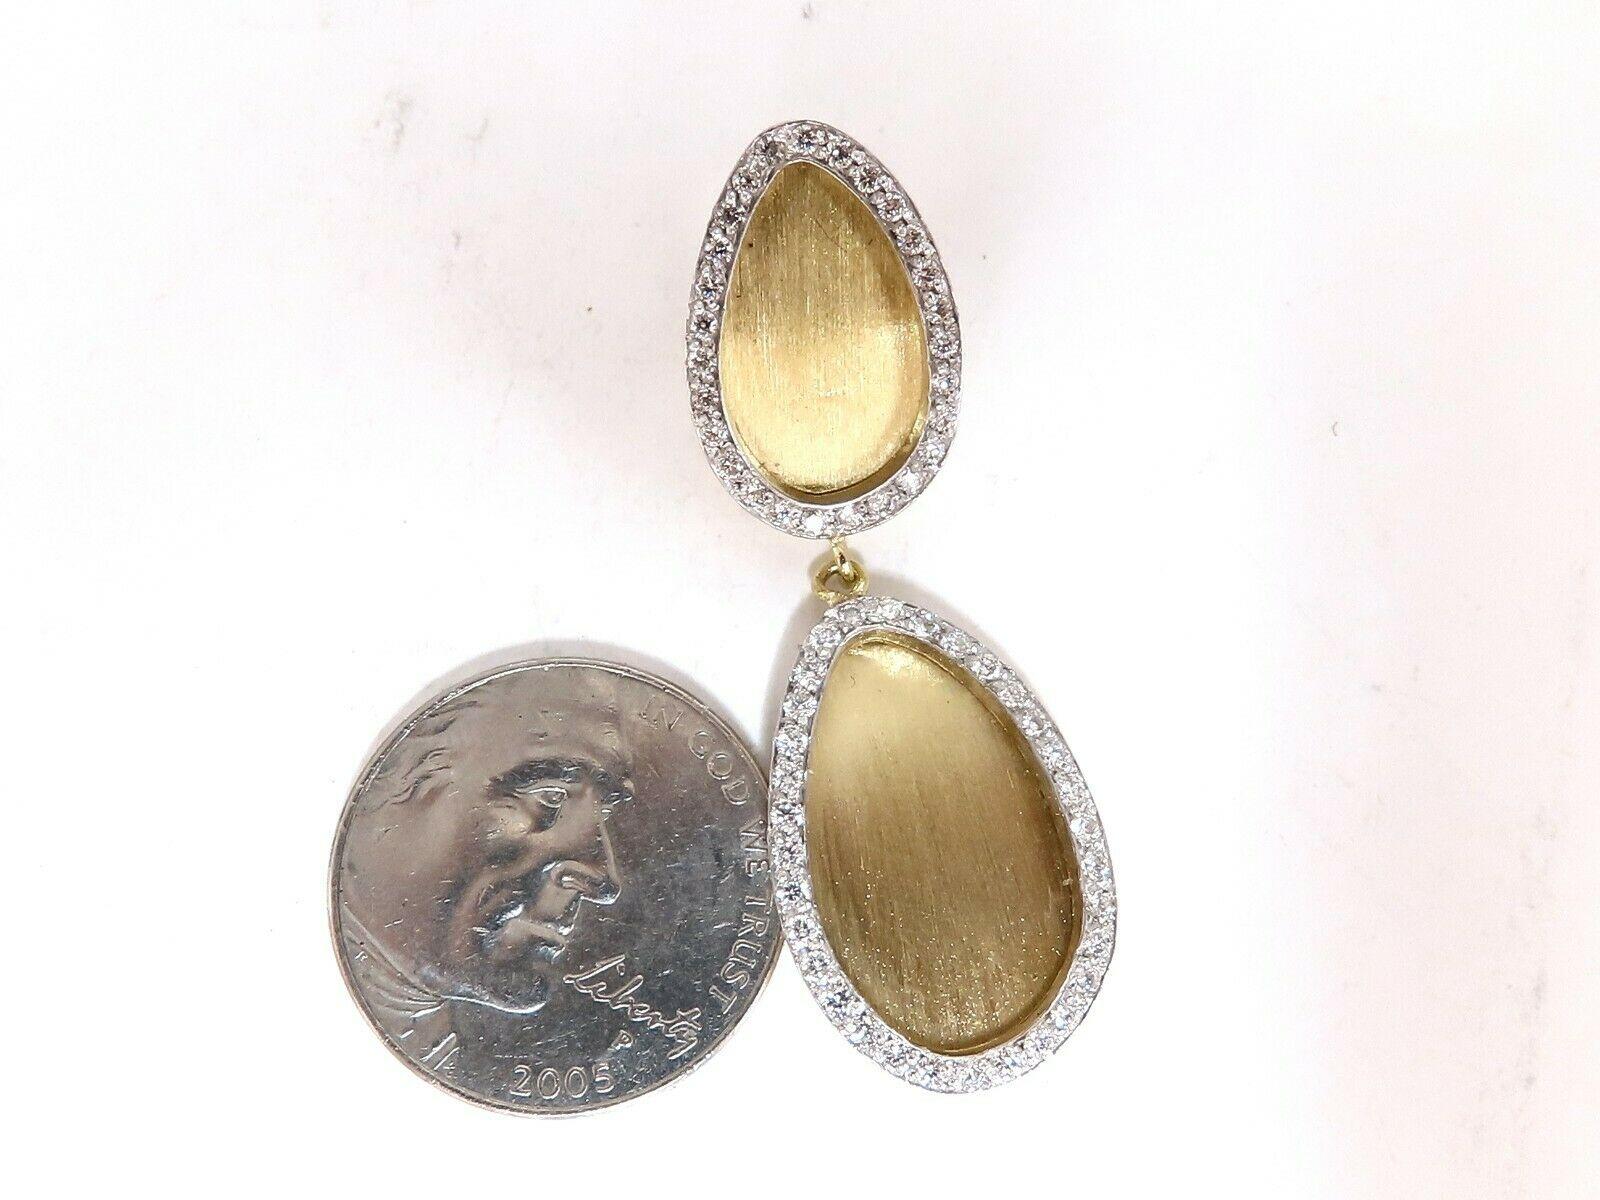 Brush Finished Tear Drop Dangle Earrings

1.30ct. Natural diamonds

Rounds, full brilliant cuts

Bead set, pave.

Vs-2 clarity.

F-G color. 

14kt. Yellow gold.

9.7 Grams.

Omega Clip Backs

Overall measurements:

1.75 inch long.

.61 inch wide at